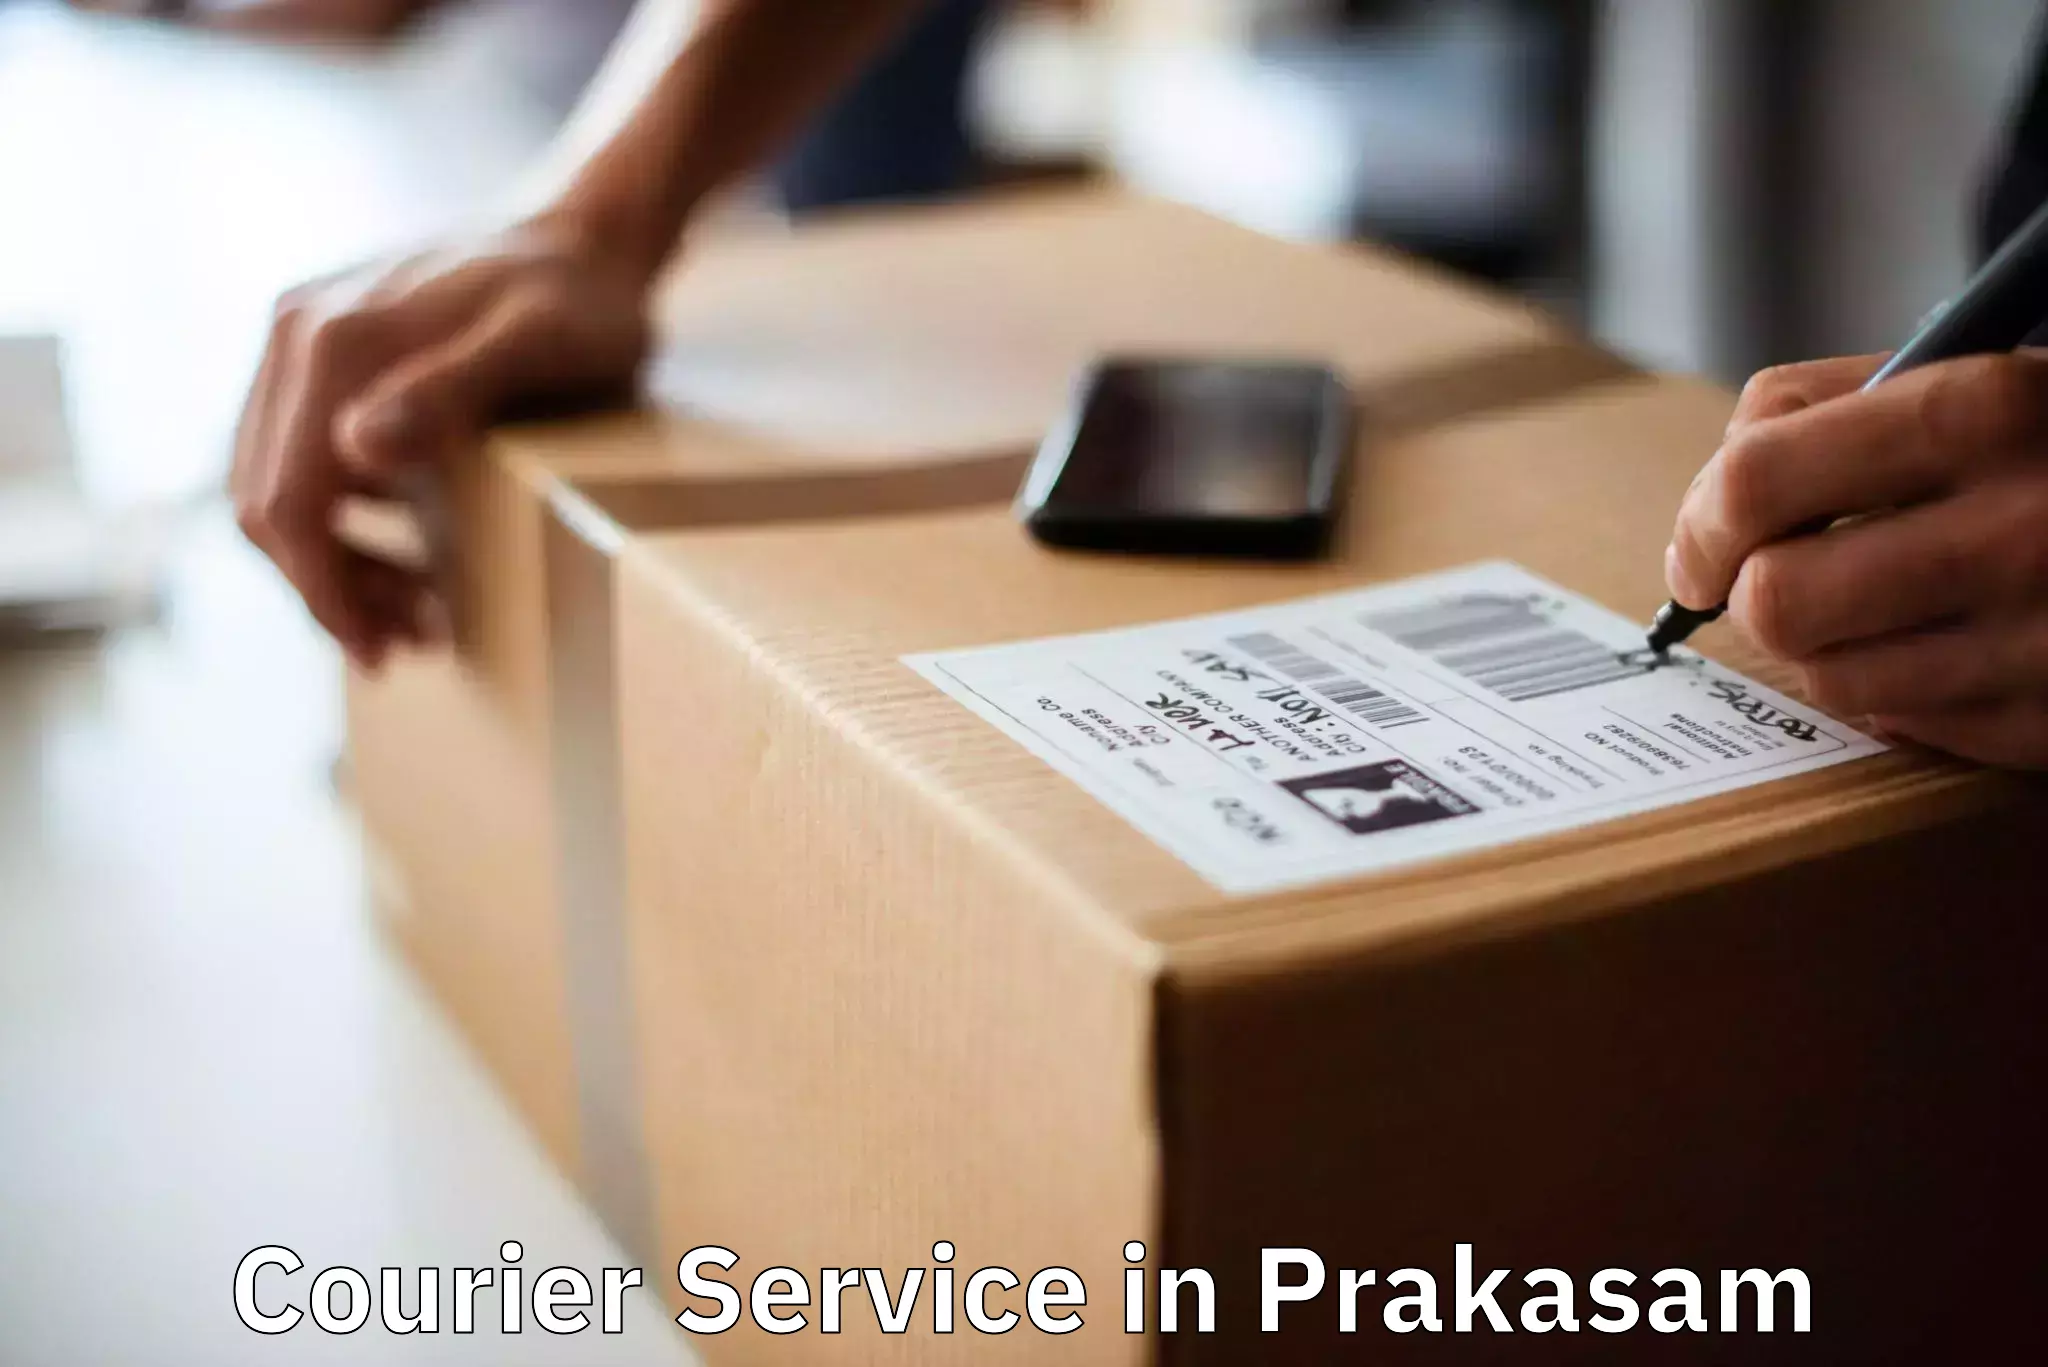 Parcel delivery automation in Prakasam